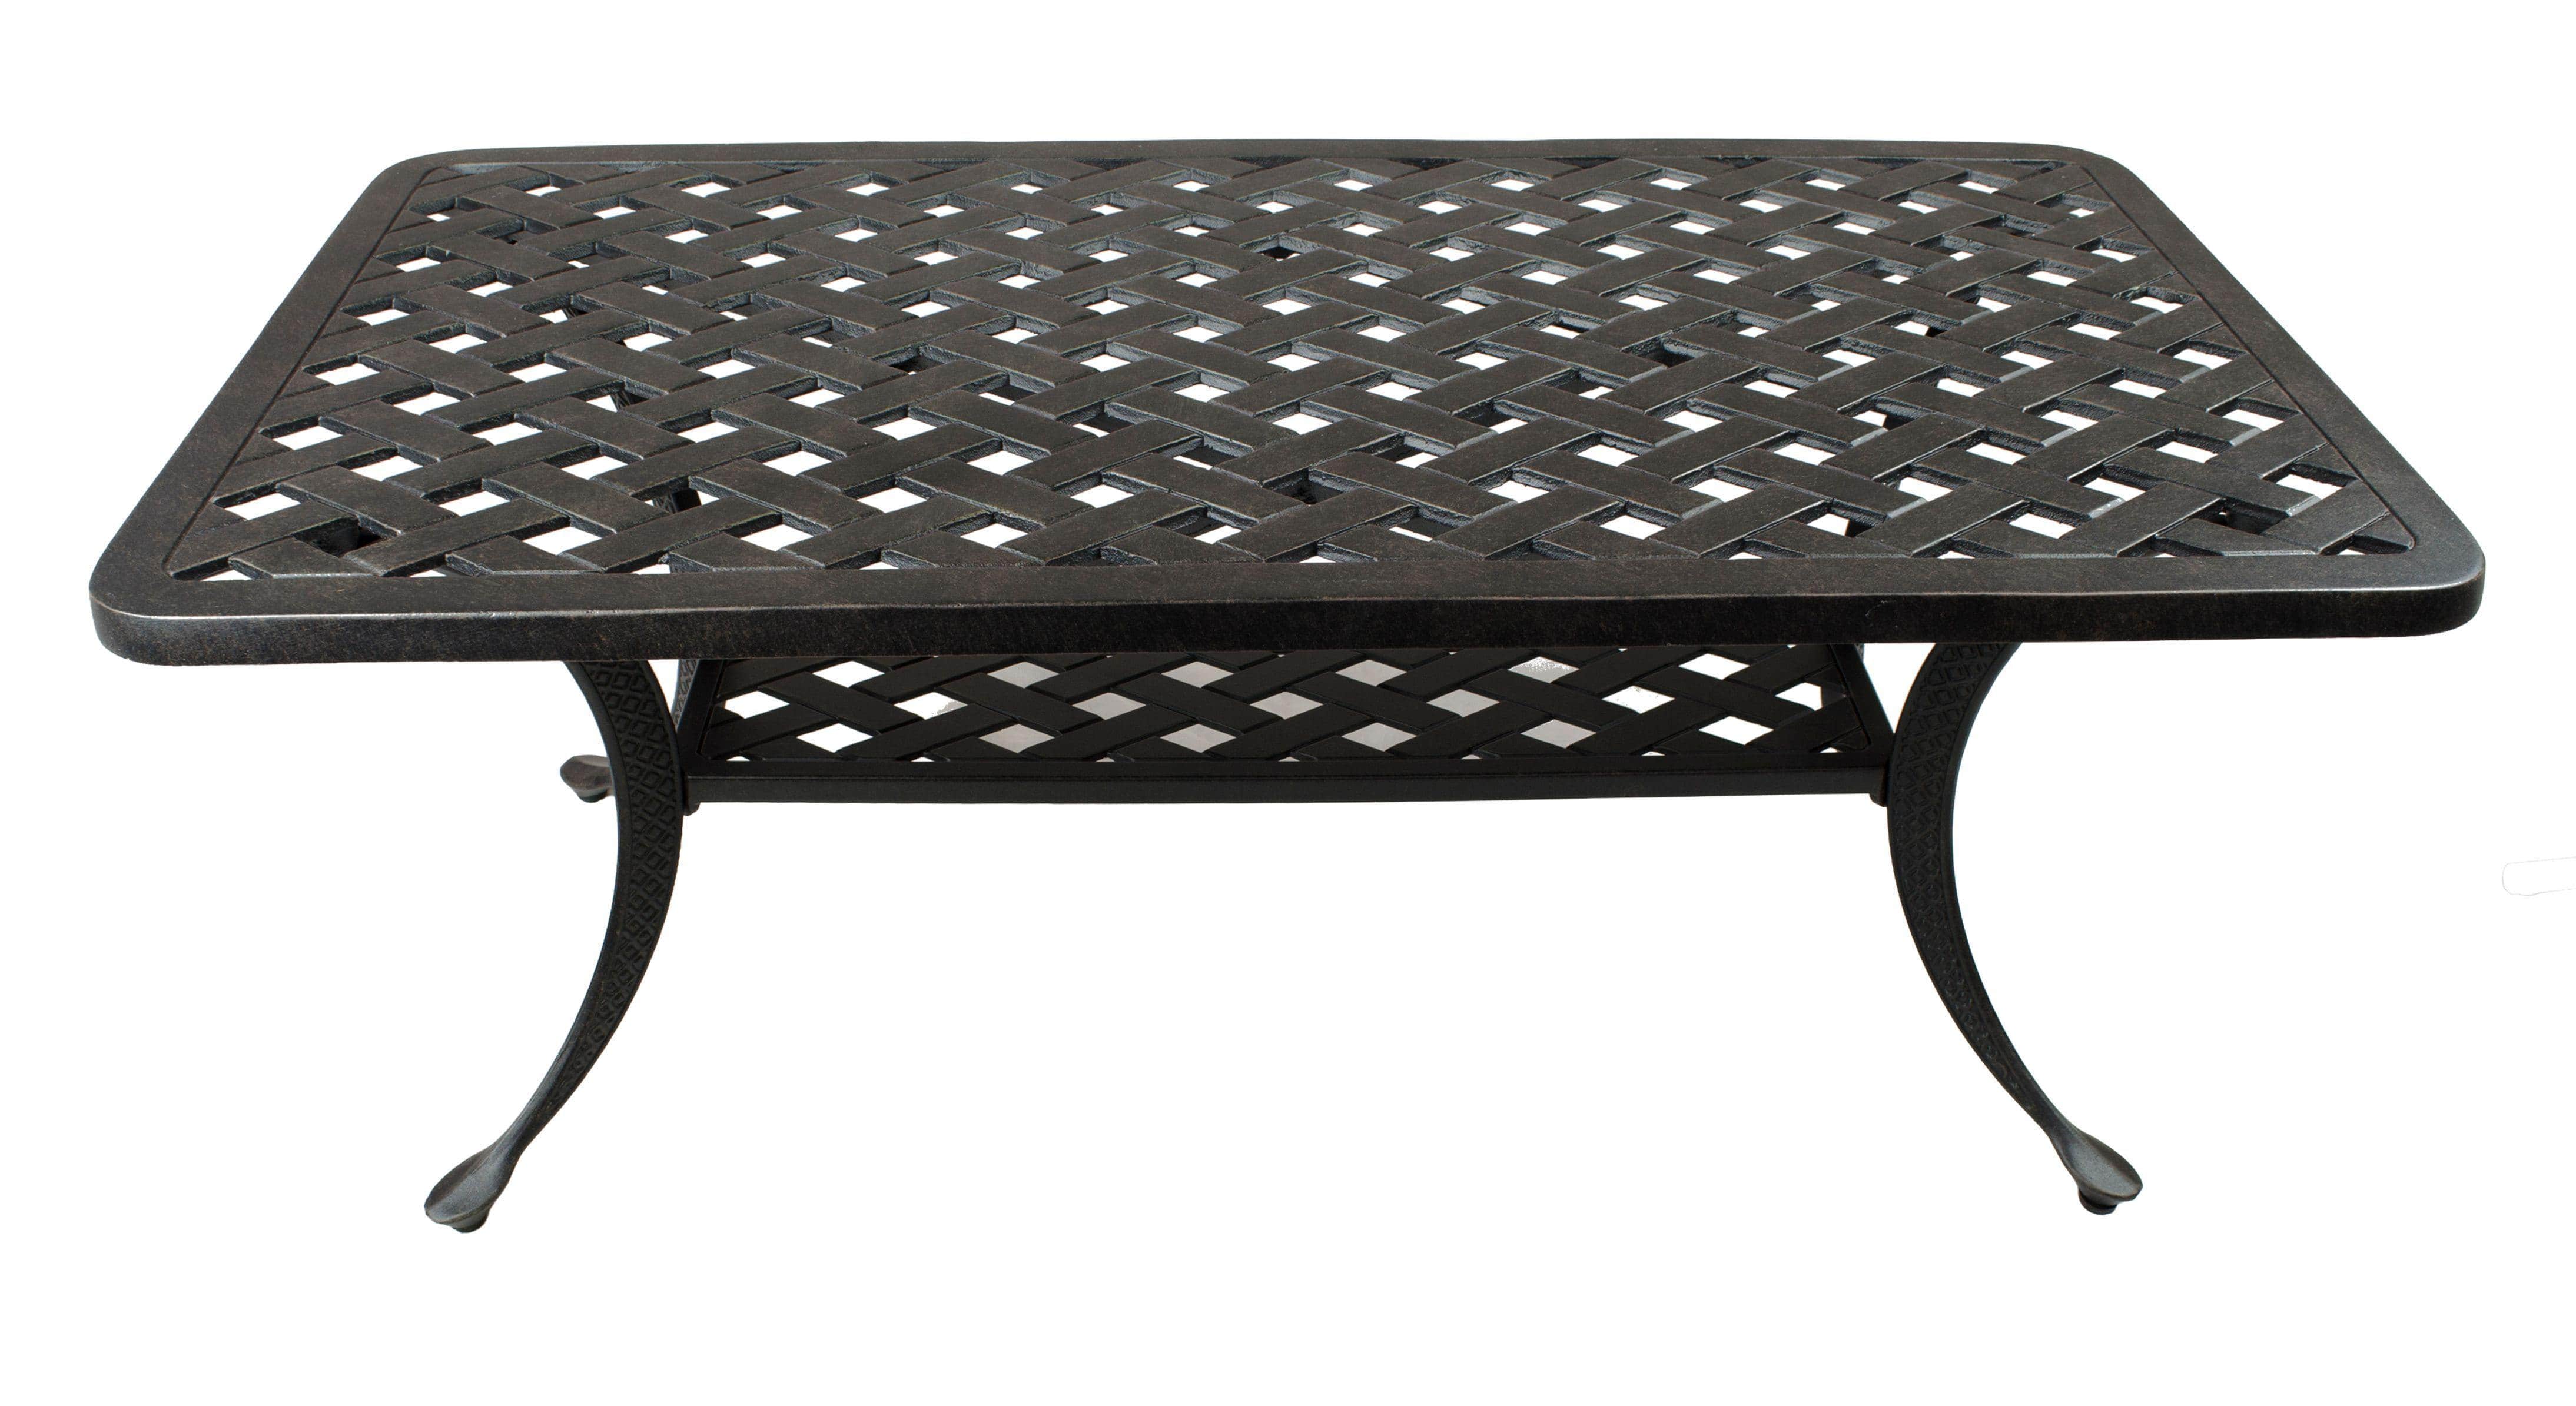 Lawton Casual Comfort Outdoor Coffee Table Lawton Casual Comfort - 42" X 21" Rectangle Coffee Table Weave